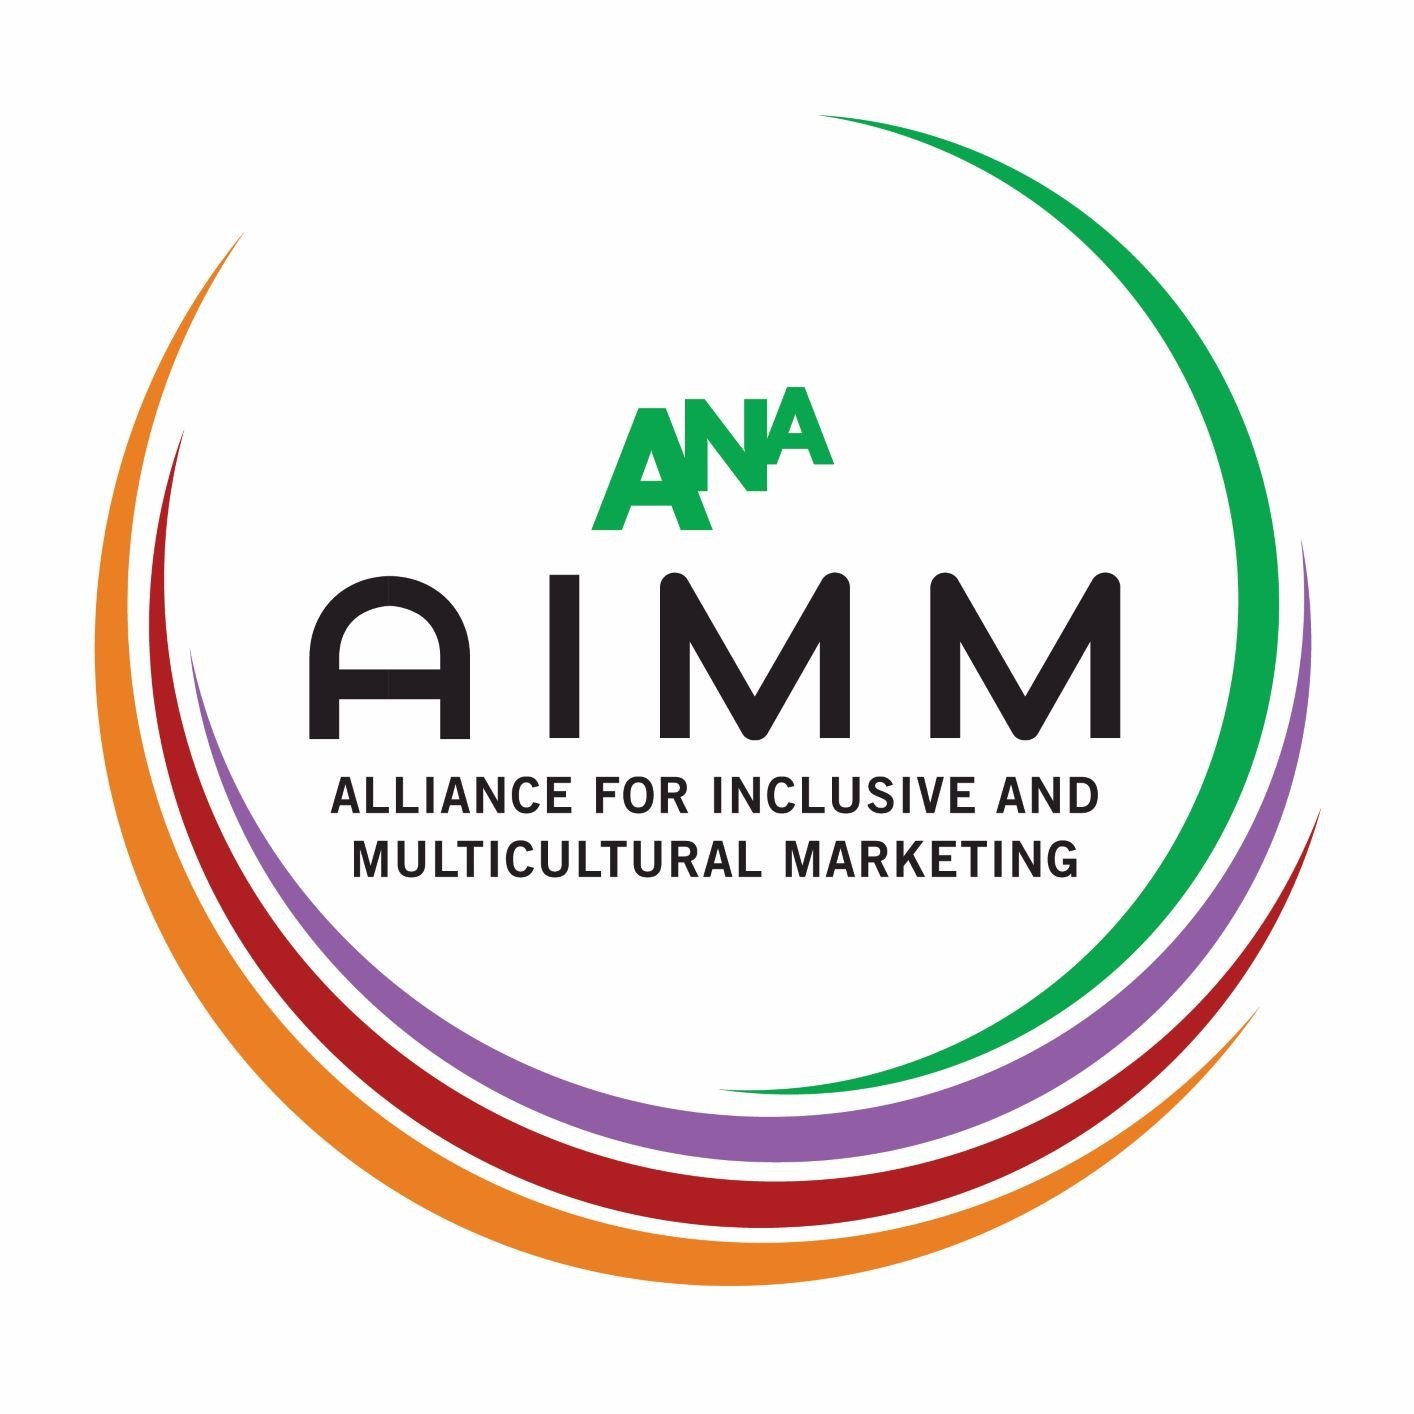 ANA's Alliance for Inclusive and Multicultural Marketing Challenges